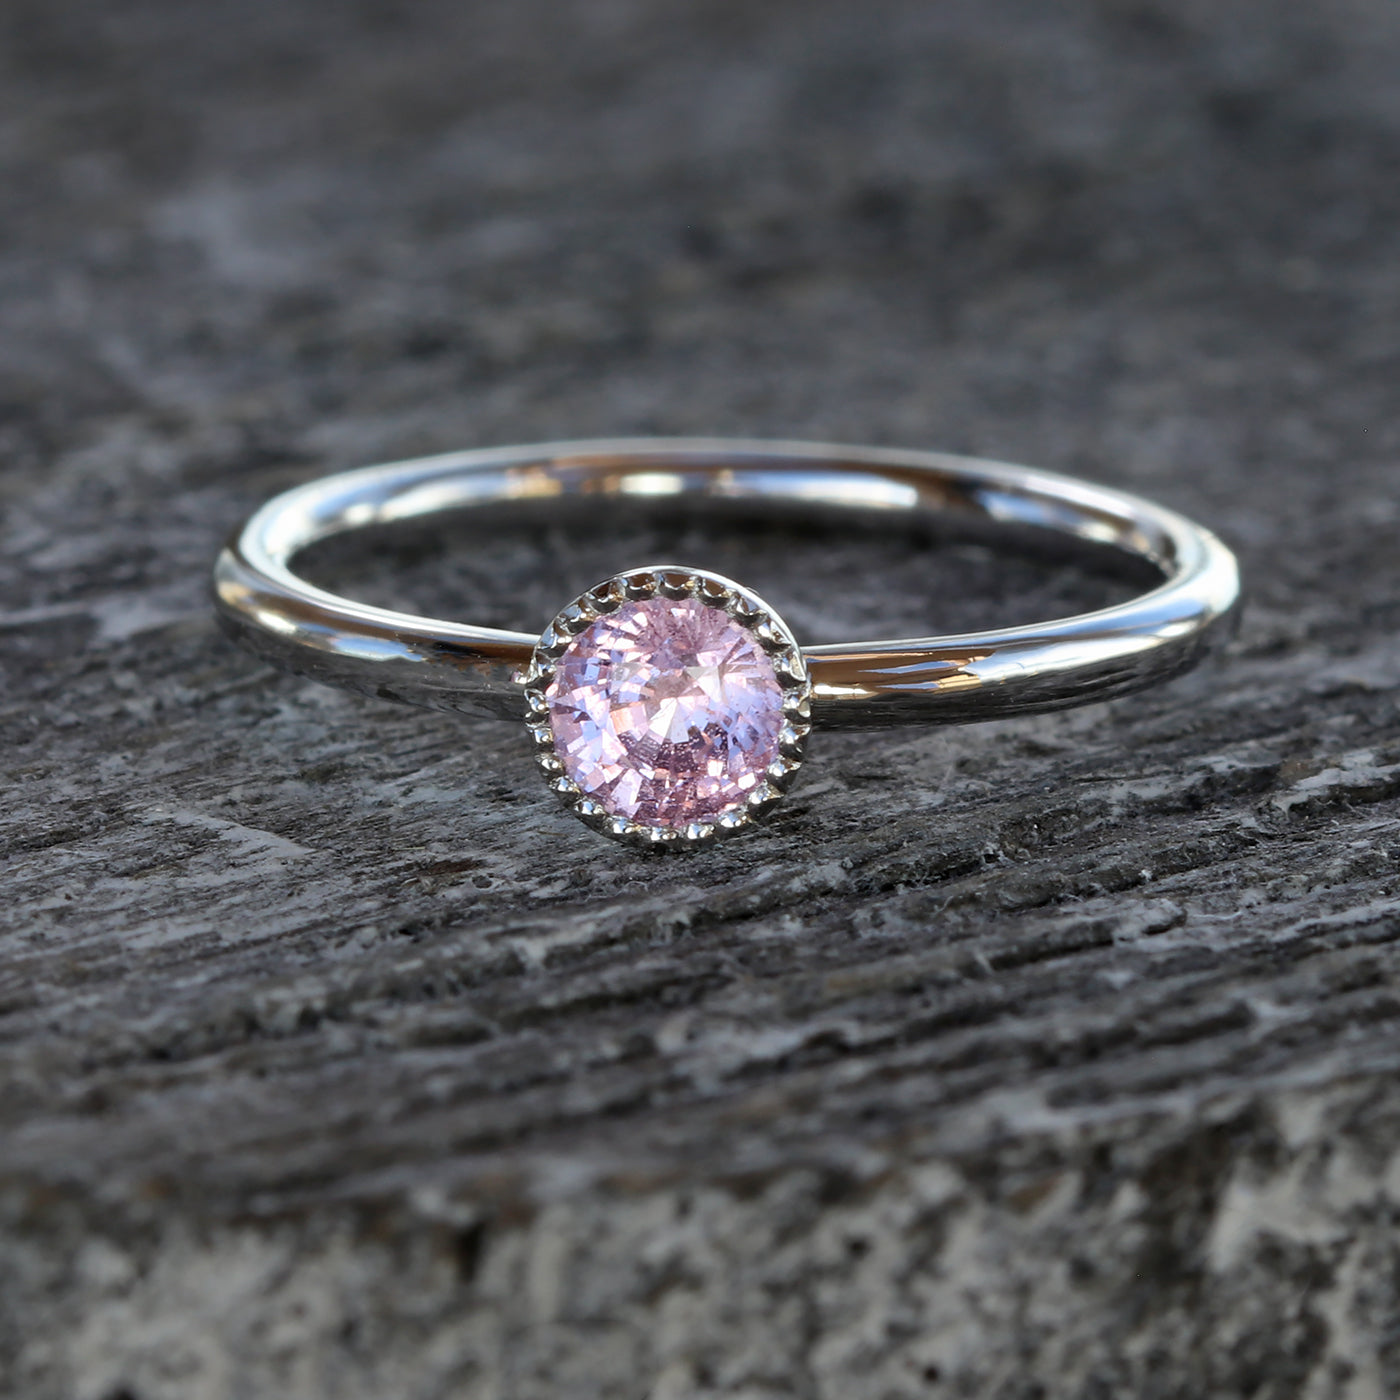 Platinum Petite Pink Sapphire Solitaire Engagement Ring (Size I 1/2, Resize G - J)